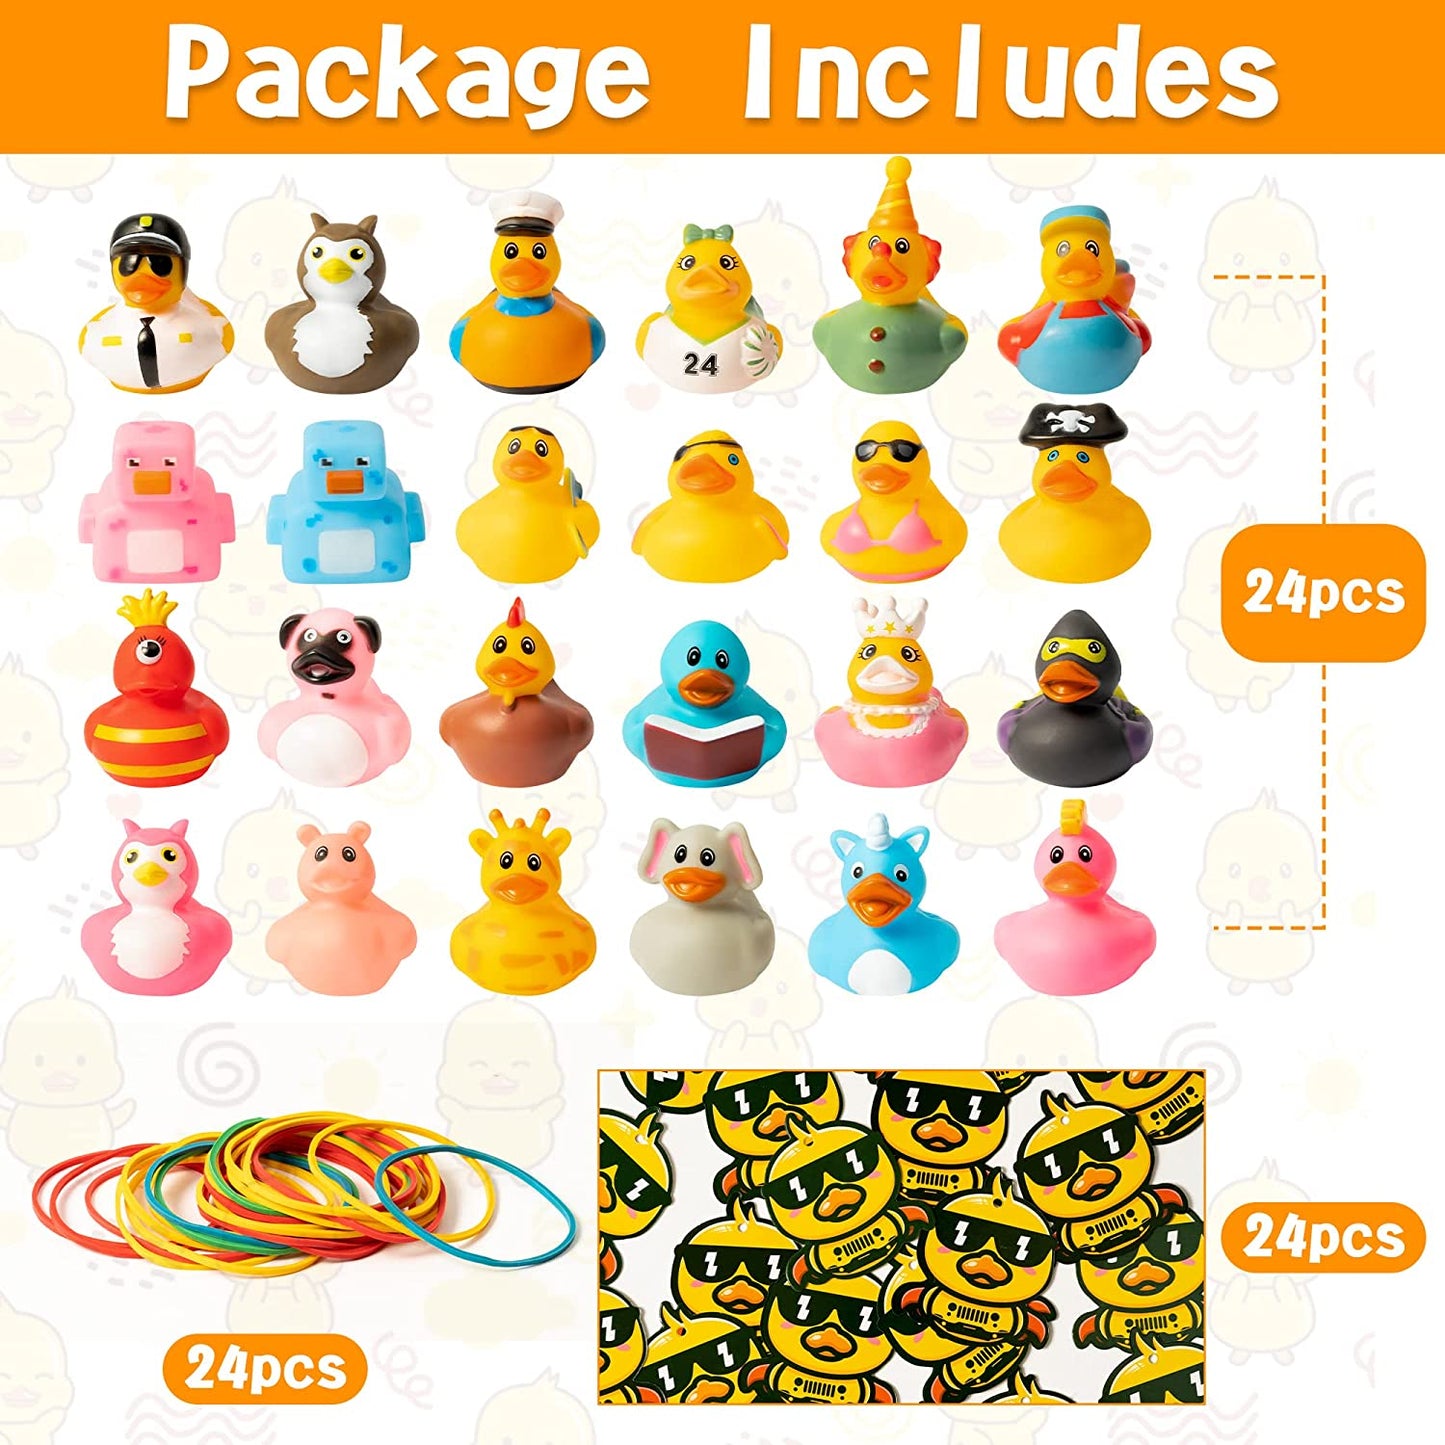 BkeeCten 24Set You've Been Ducked Card with Rubber Ducks and Strings Duck Duck Tags for Hiding Rubber Ducky Design Ducking Game Card with Hole Rubber Band for Car Street Toy Party Game Decor Favors